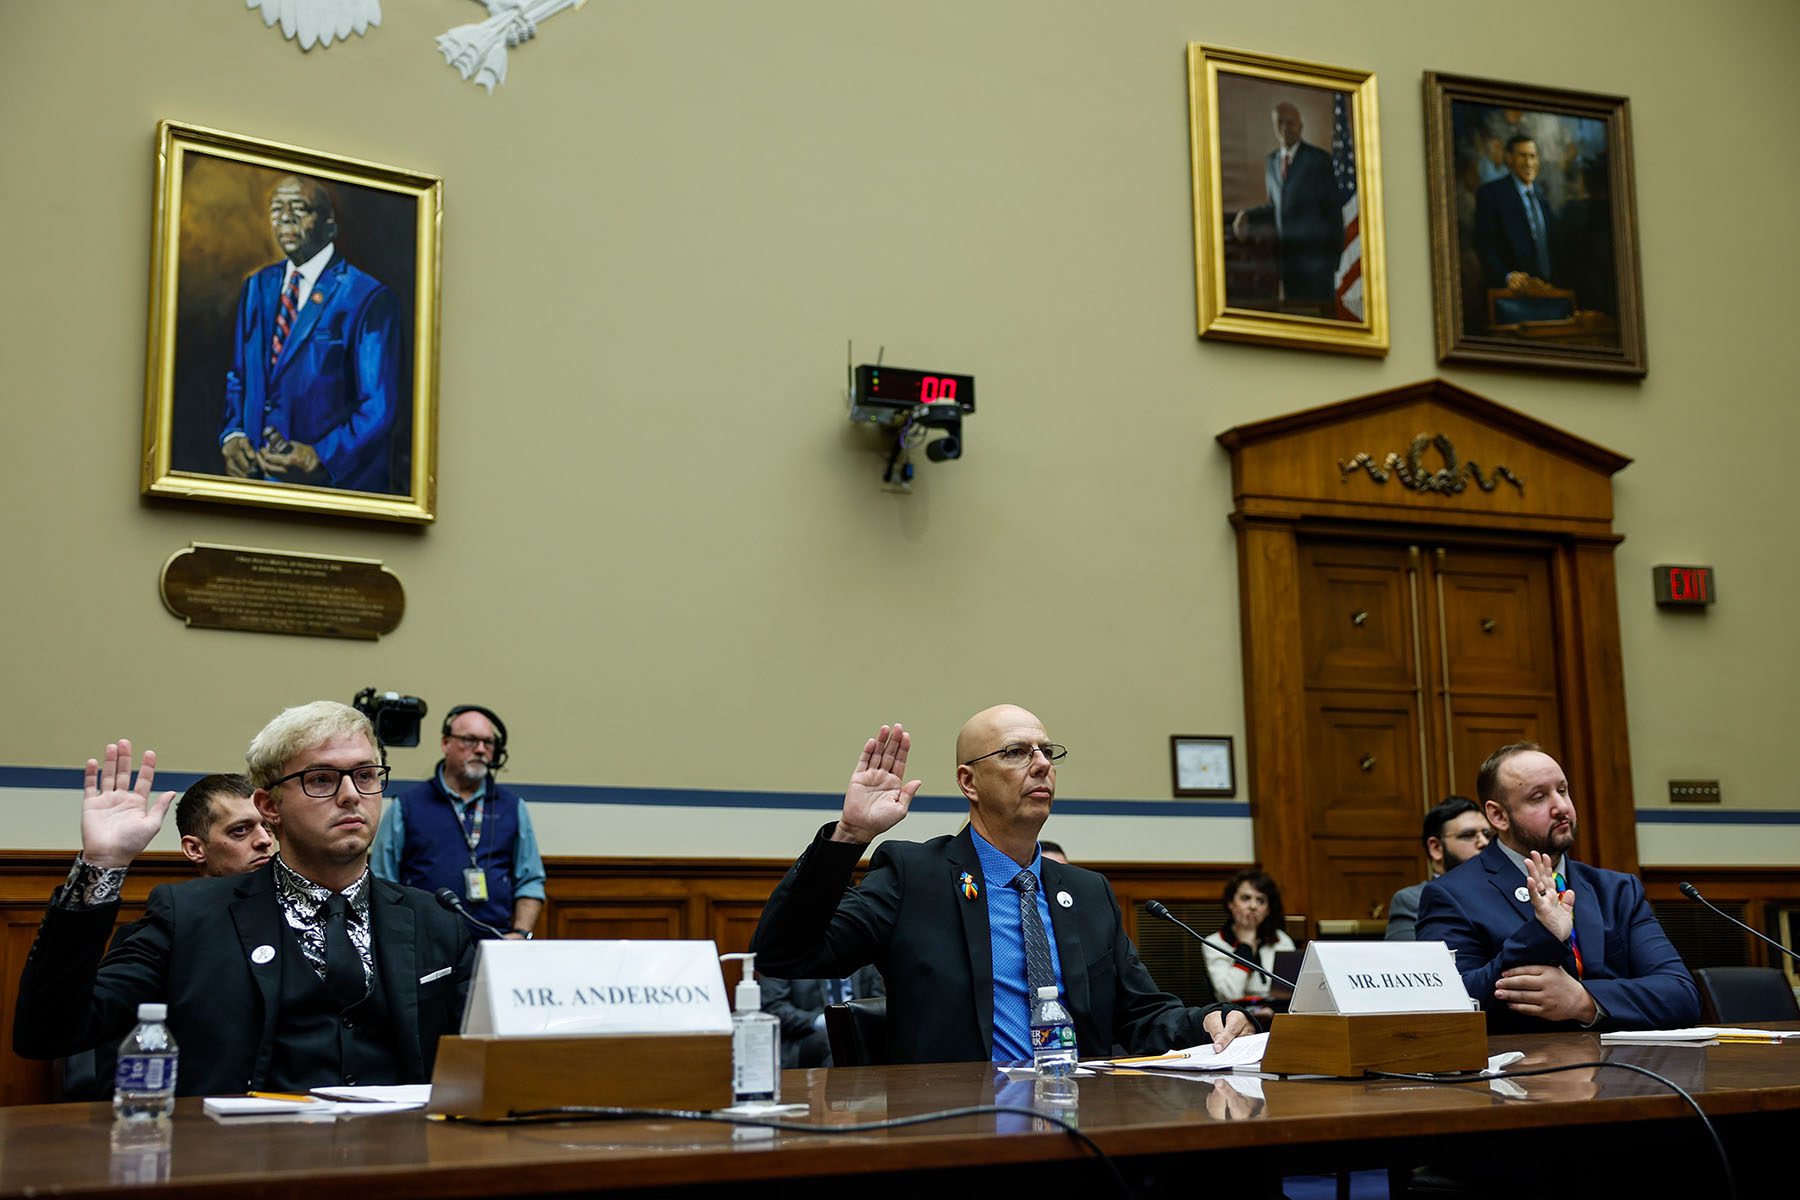 Michael Anderson, Matthew Haynes and James Slaugh are sworn in during a House Oversight Committee hearing on Capitol Hill.